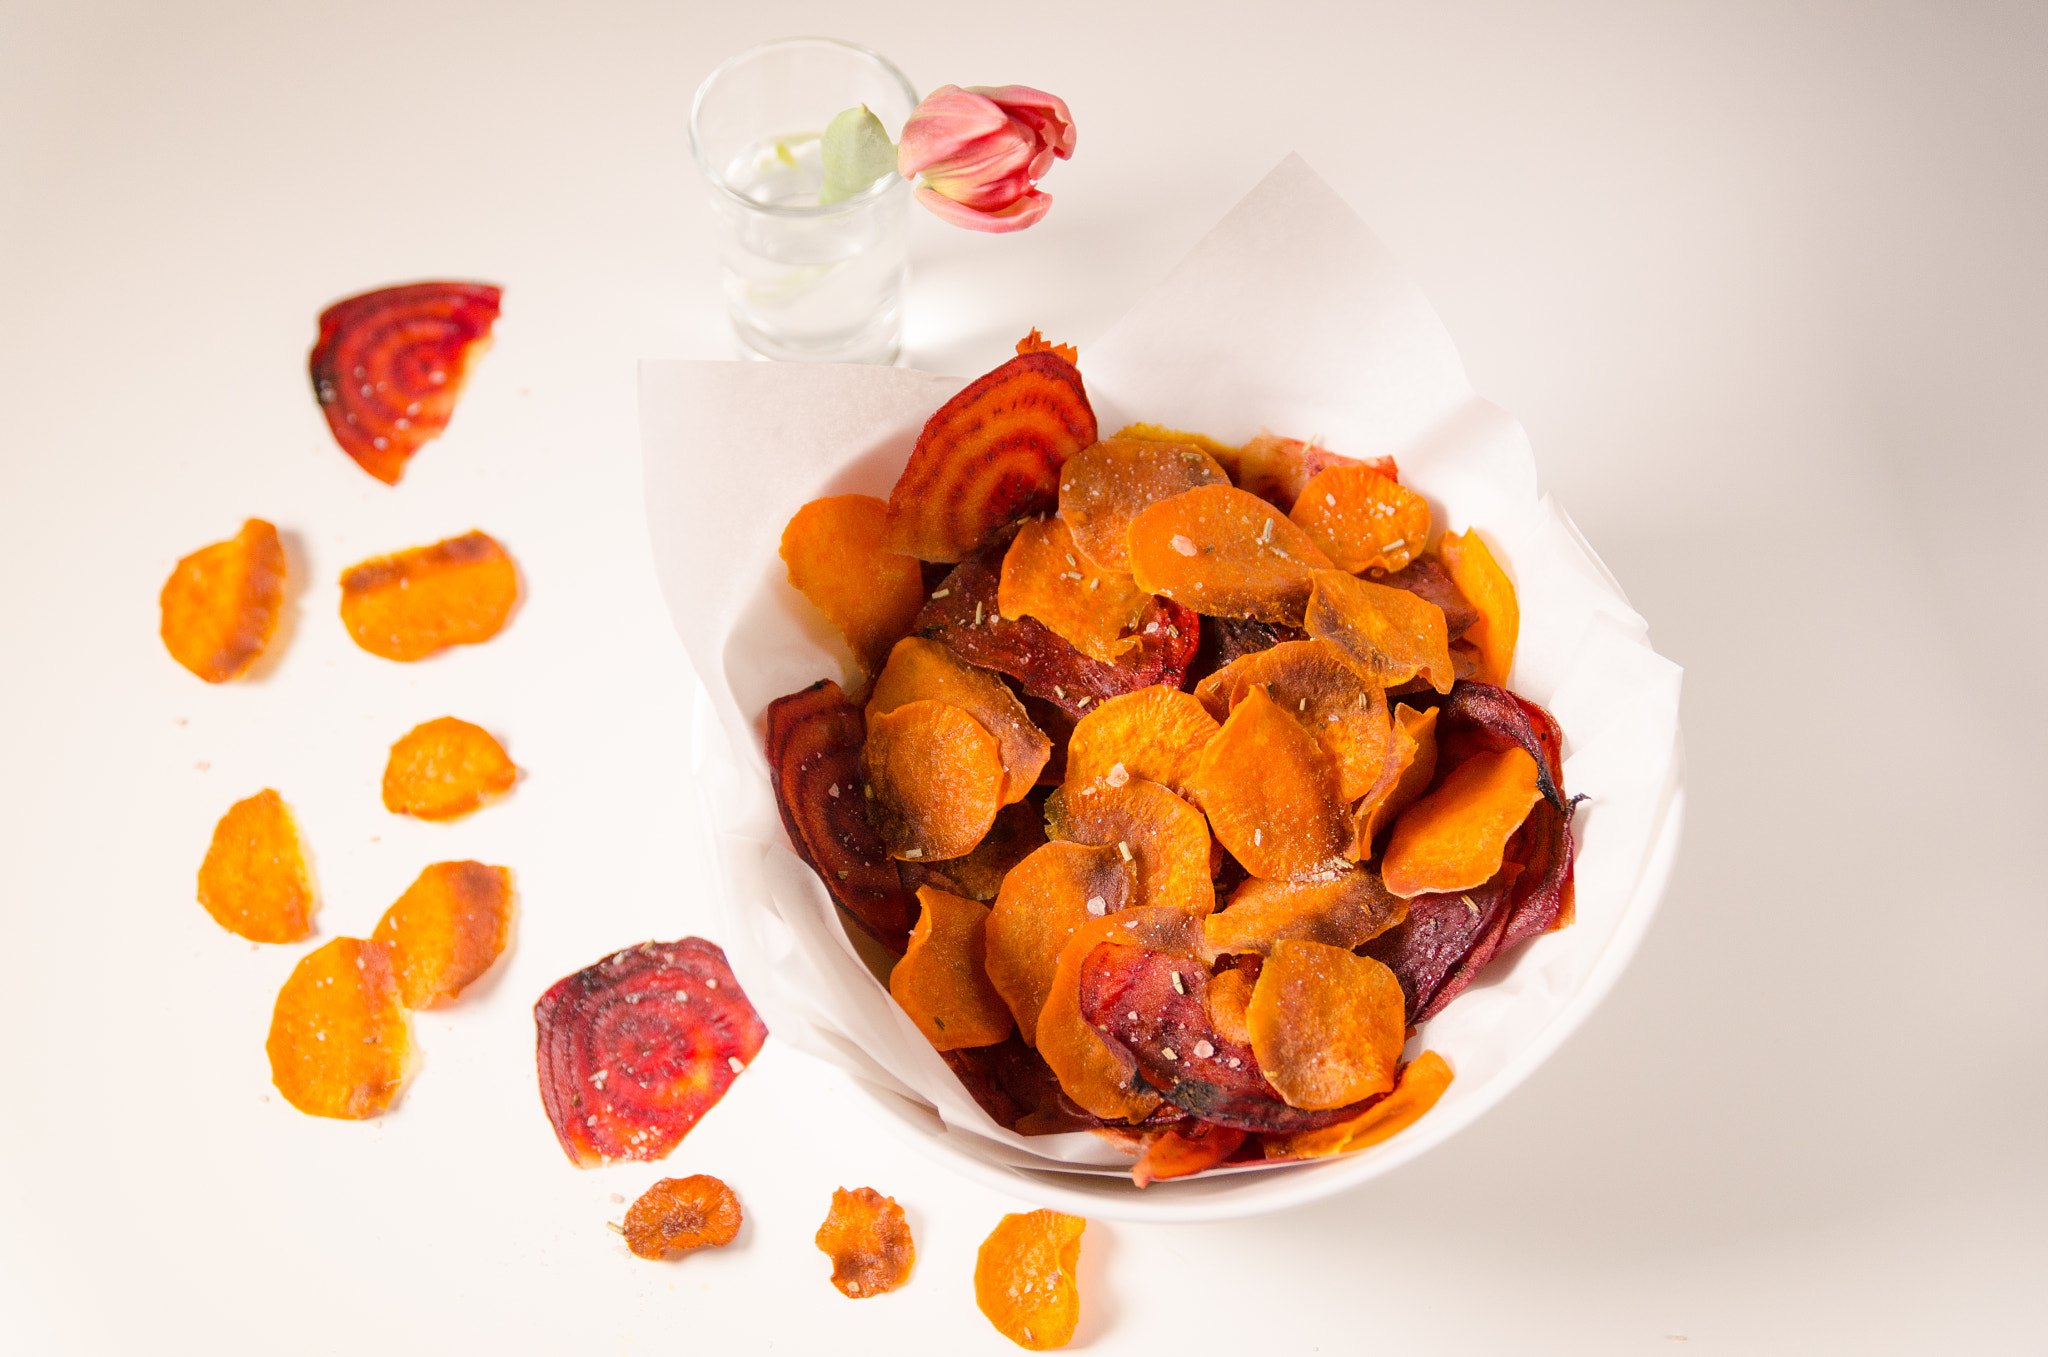 Nikon D7000 + Sigma 17-70mm F2.8-4 DC Macro OS HSM | C sample photo. Healthy vegetable chips photography